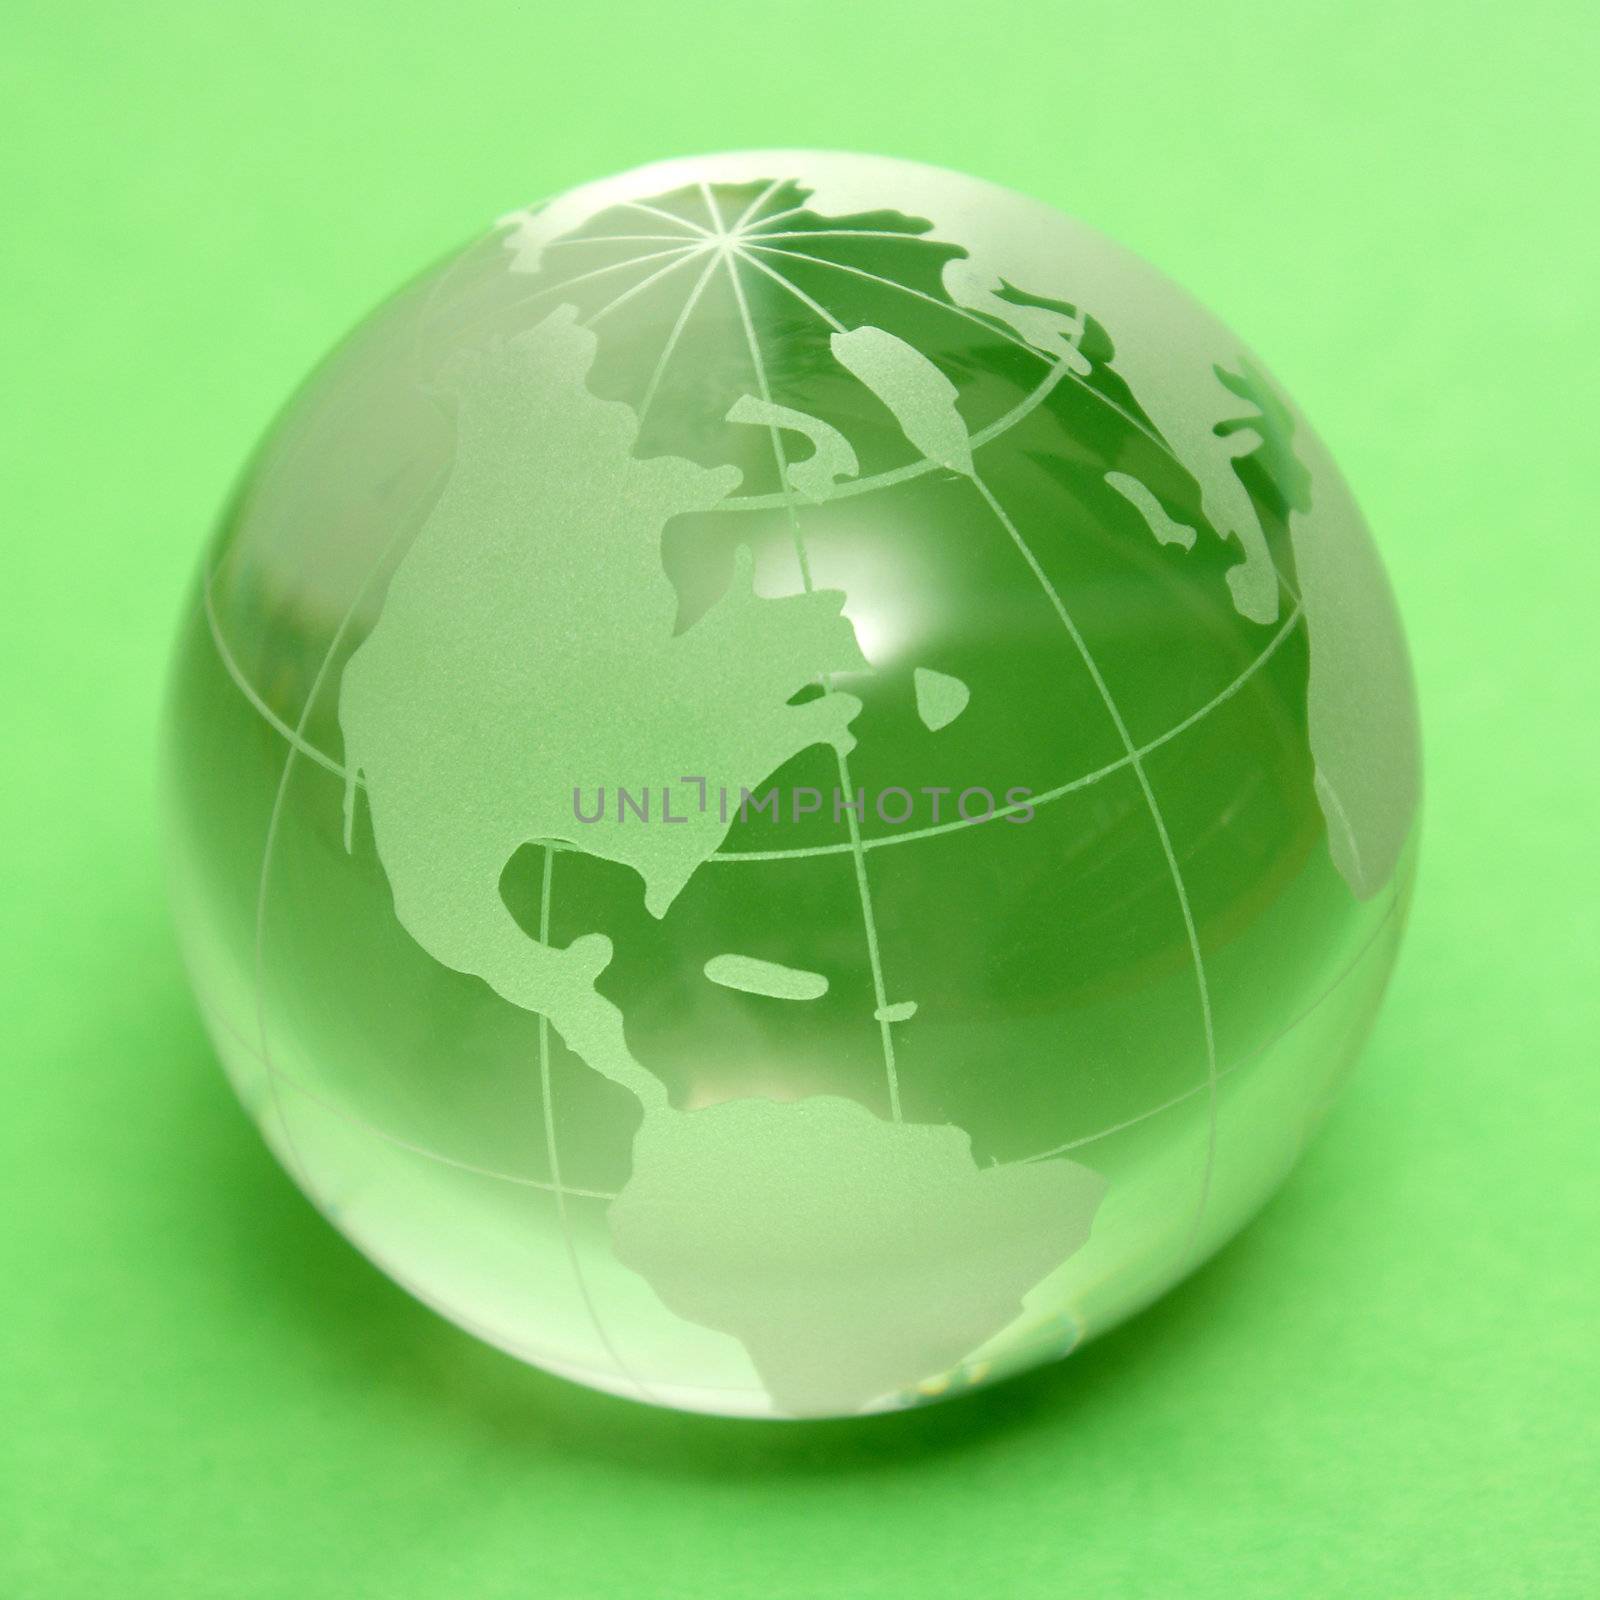 A square format shot of a glass globe of earth over a green background.